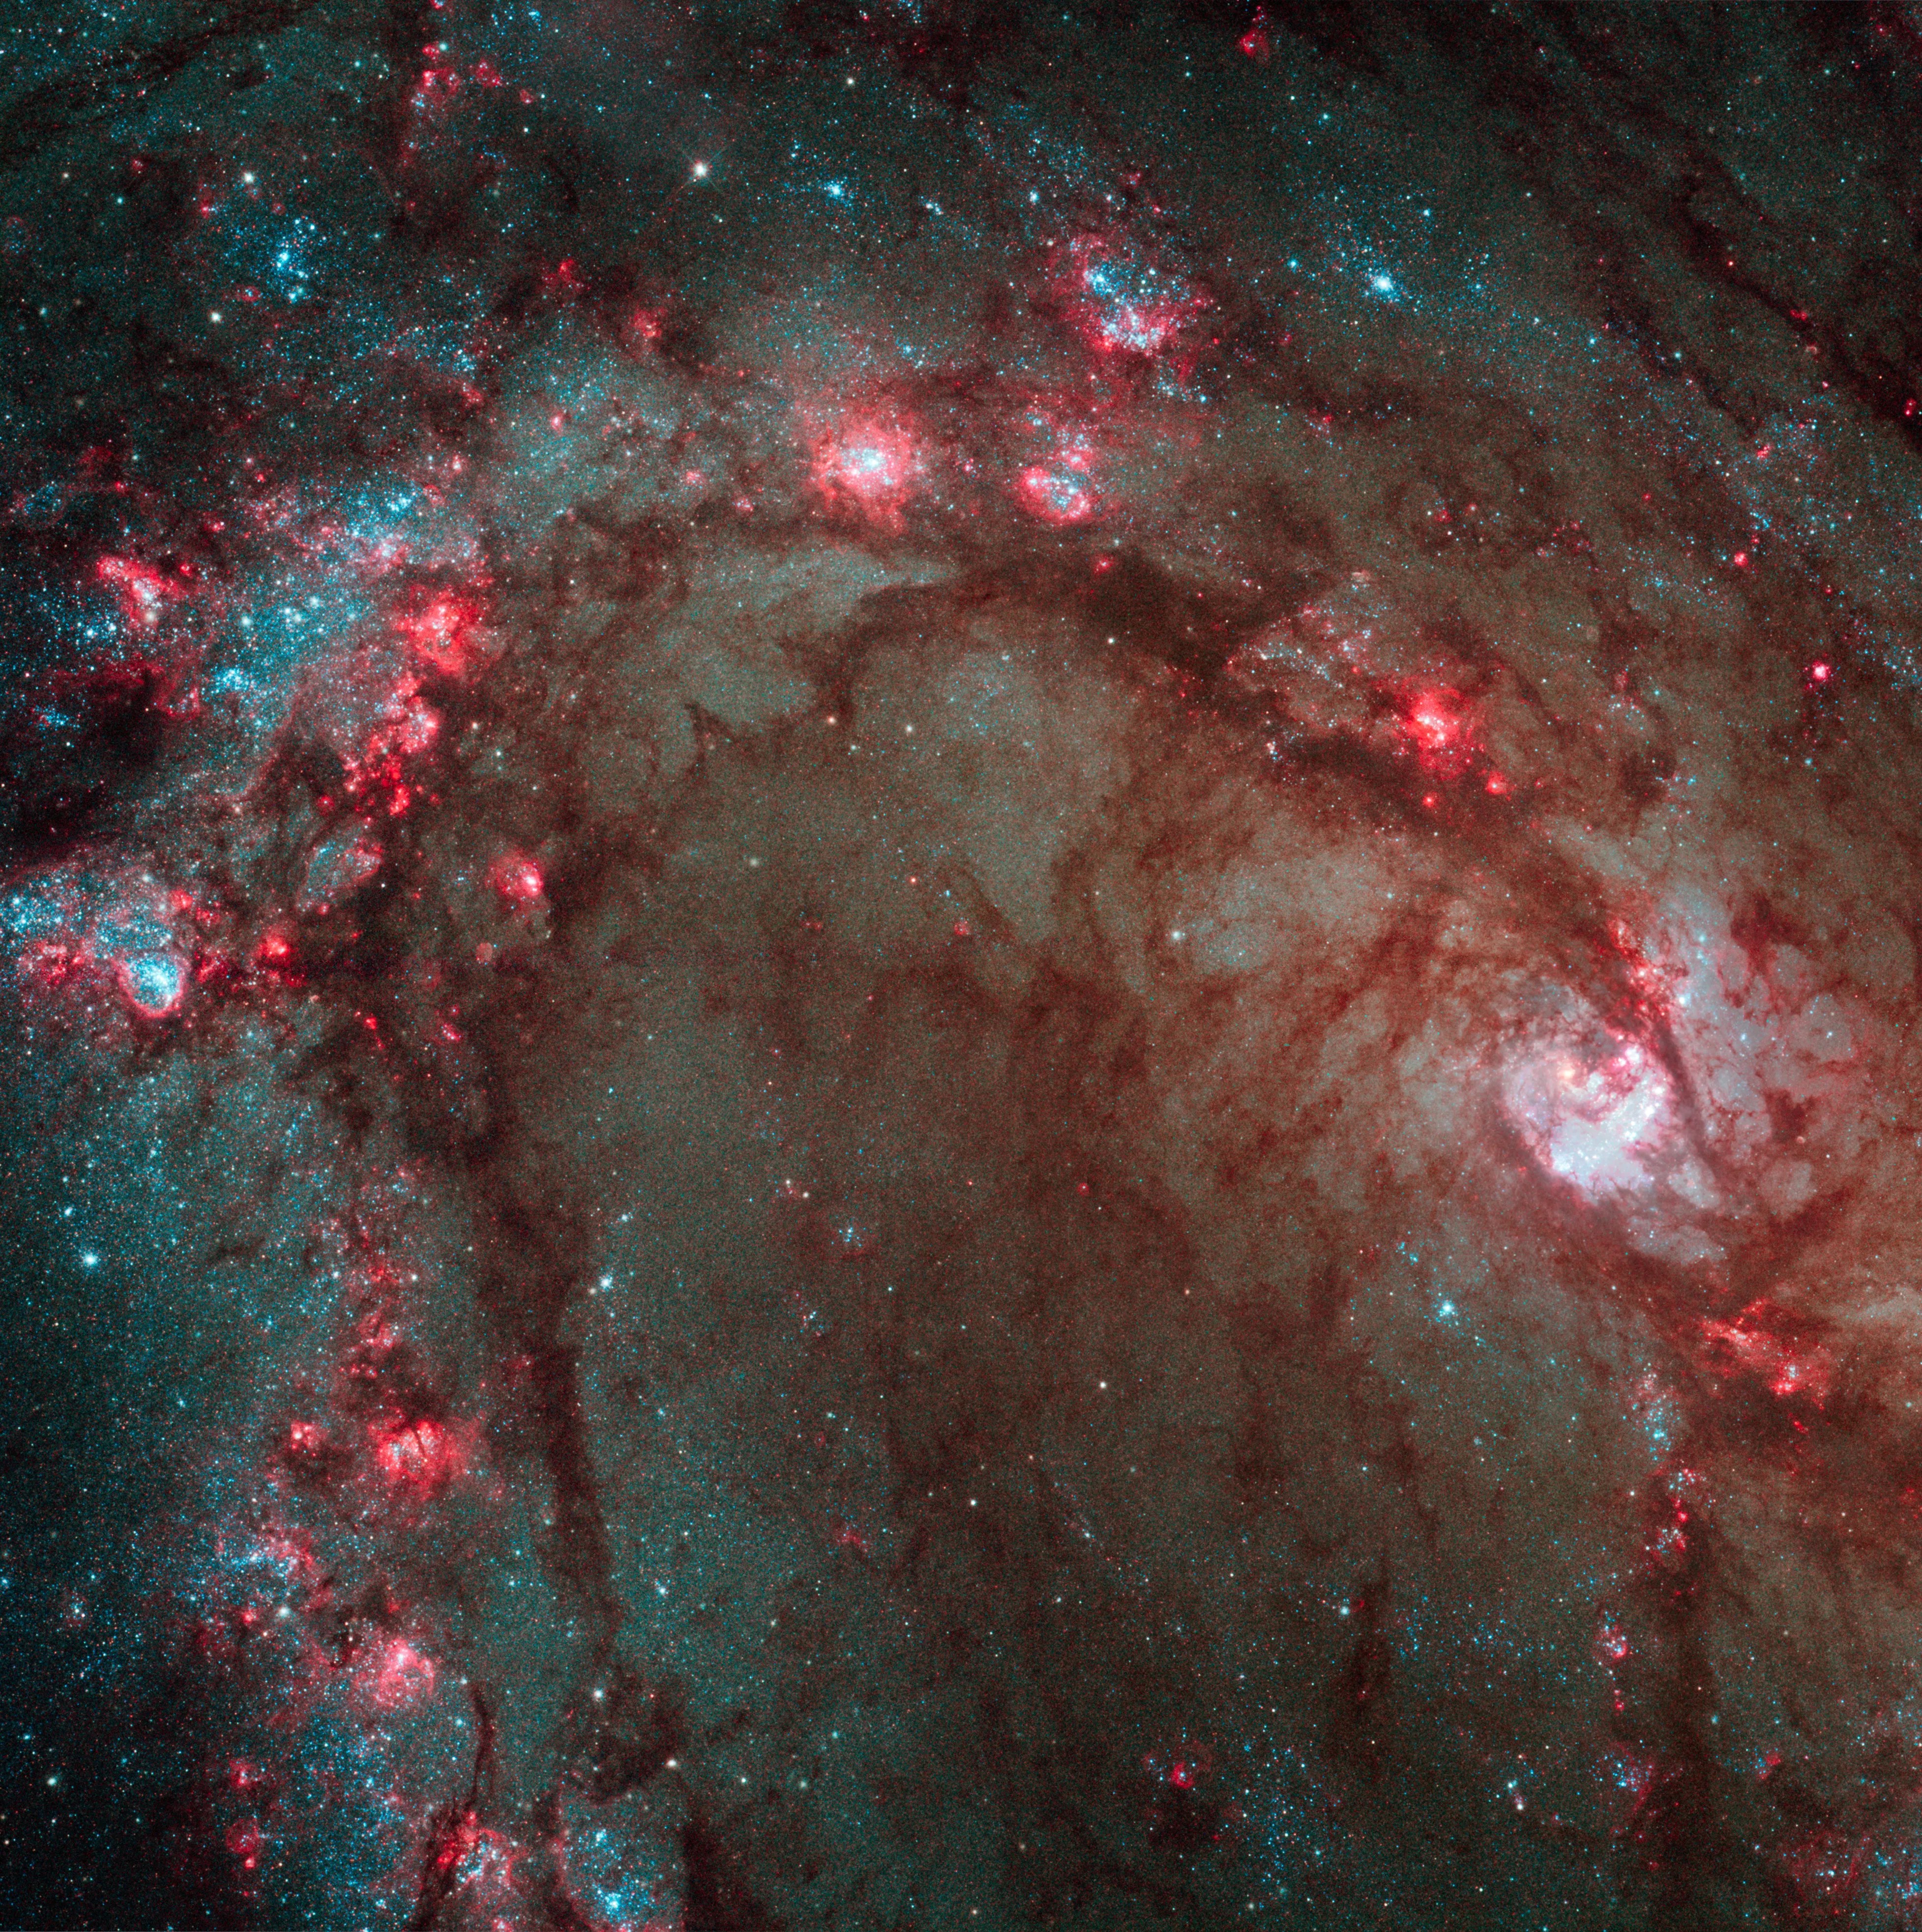 Several stars near the core of the galaxy M83 are seen in this image, in dark pink blooms of star birth and bright blue pockets of star formation.